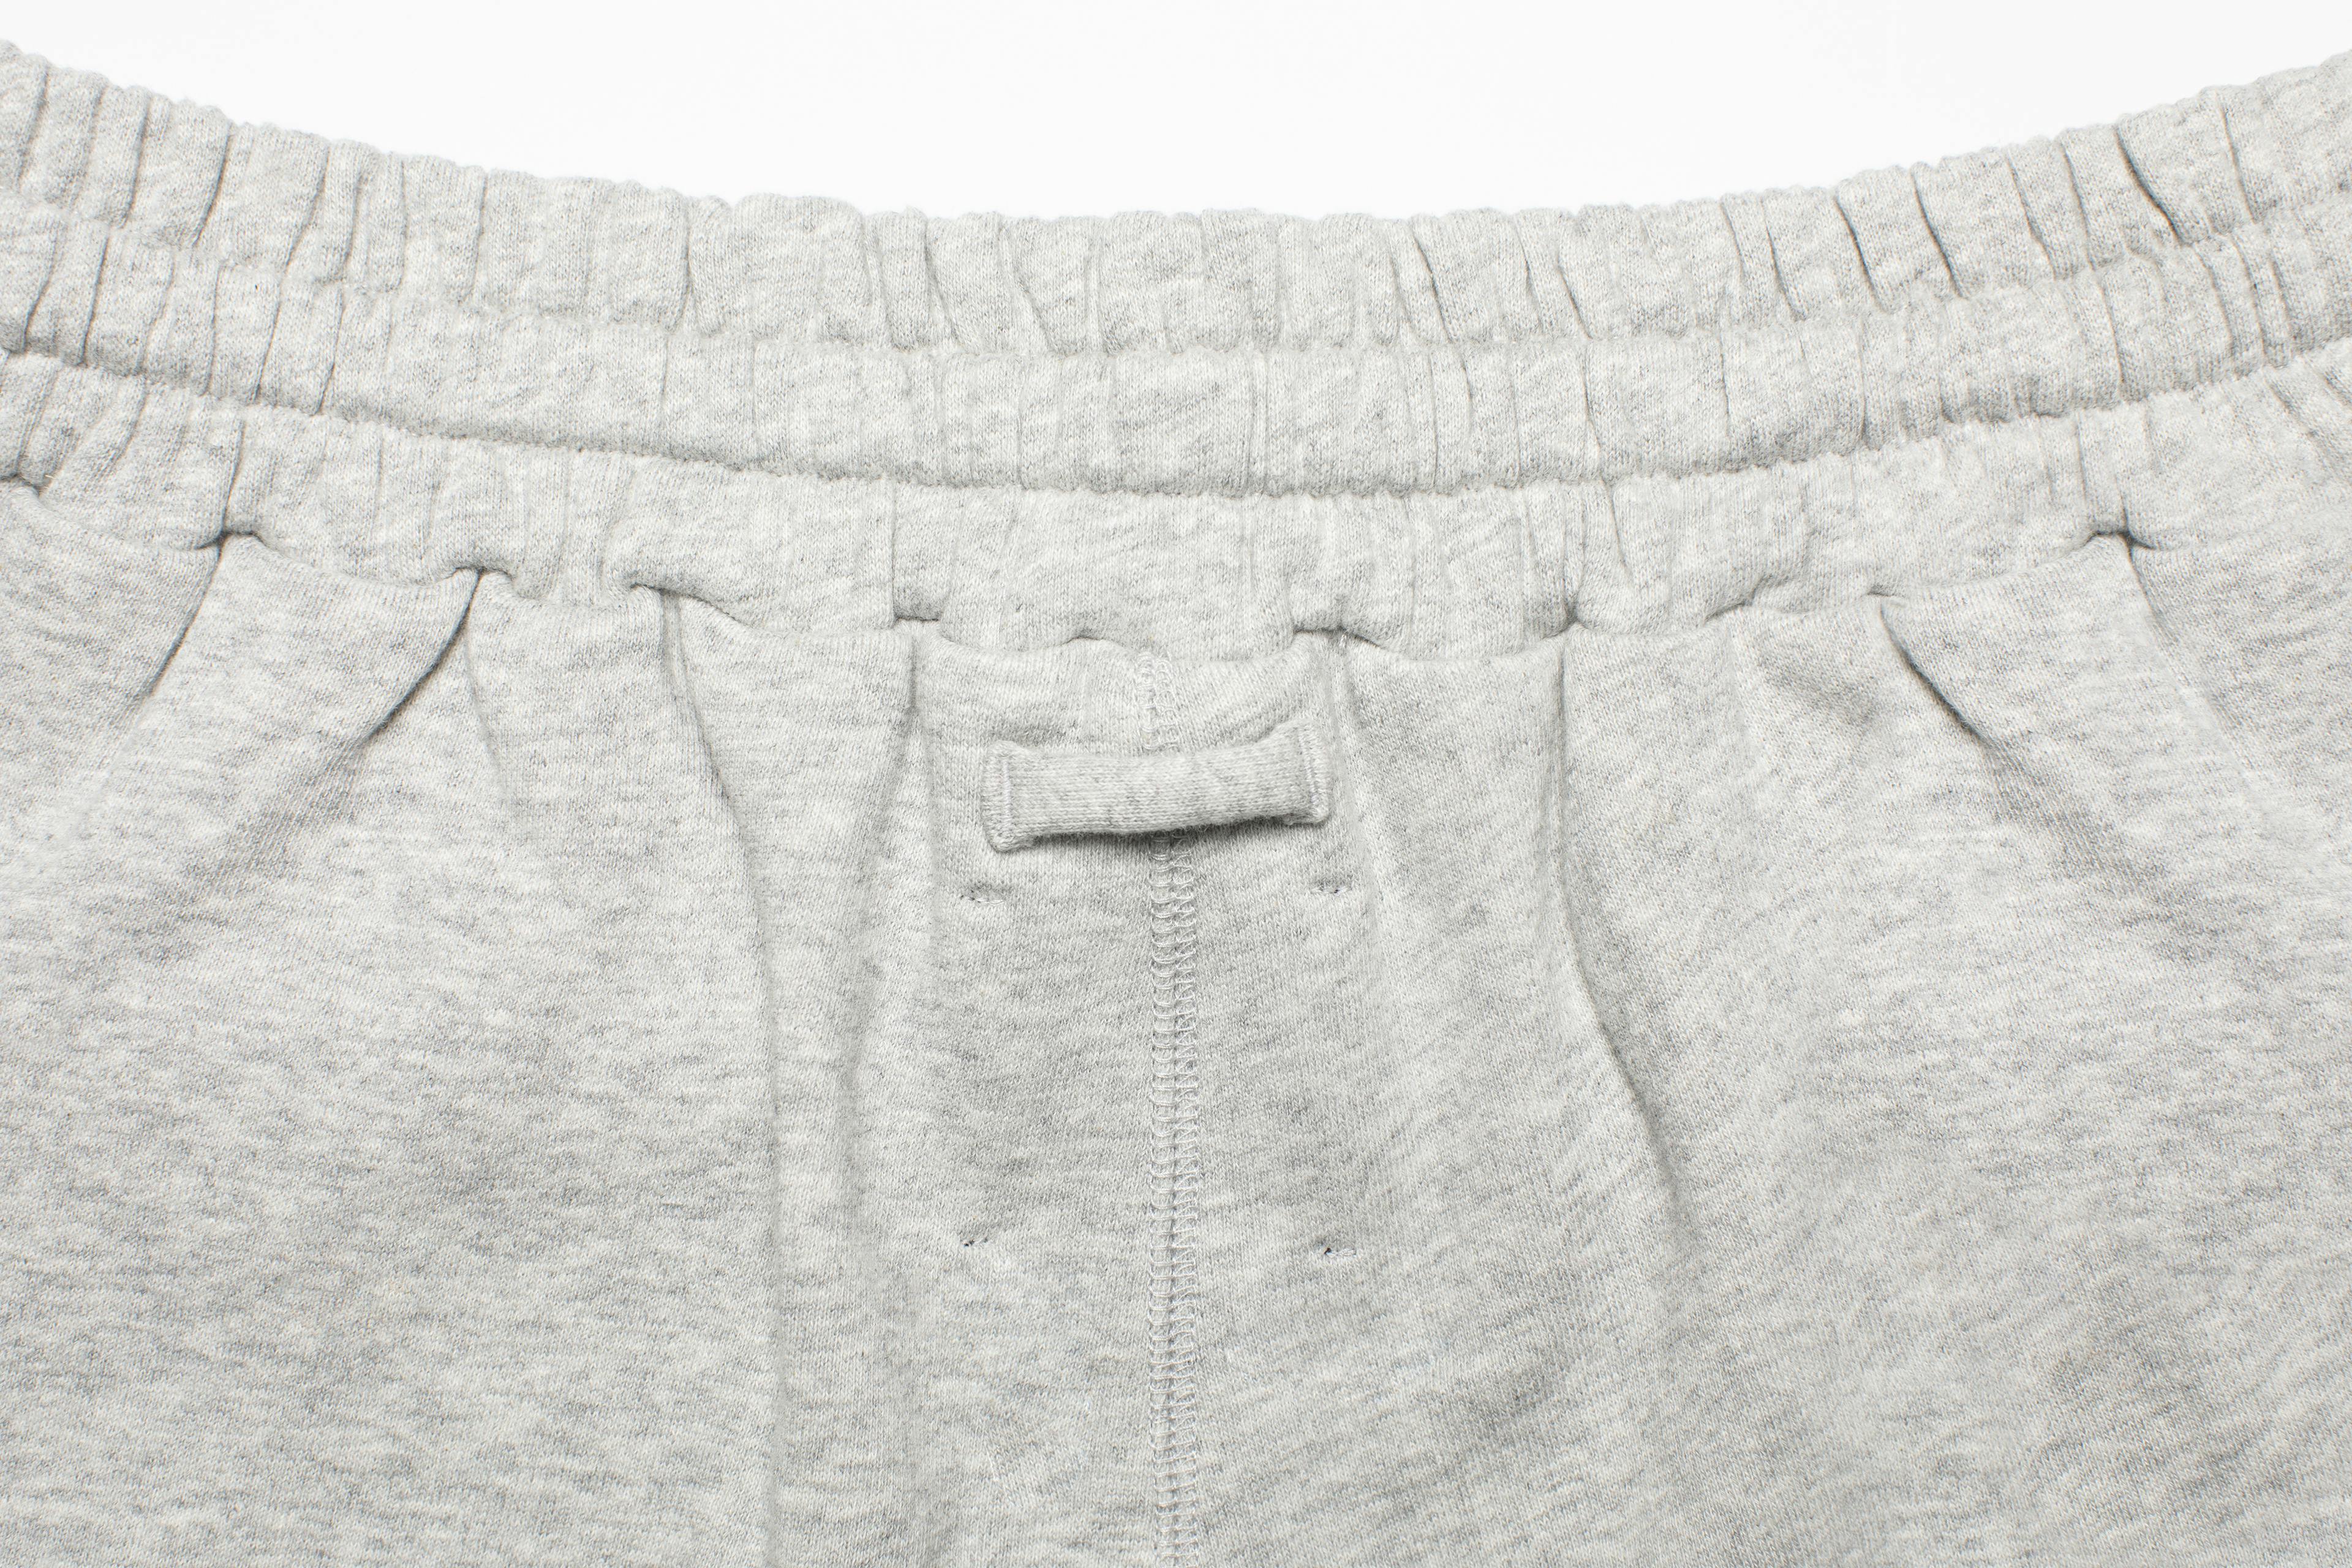 Lounge Leisure Sweatpants Waistband in Grey Color